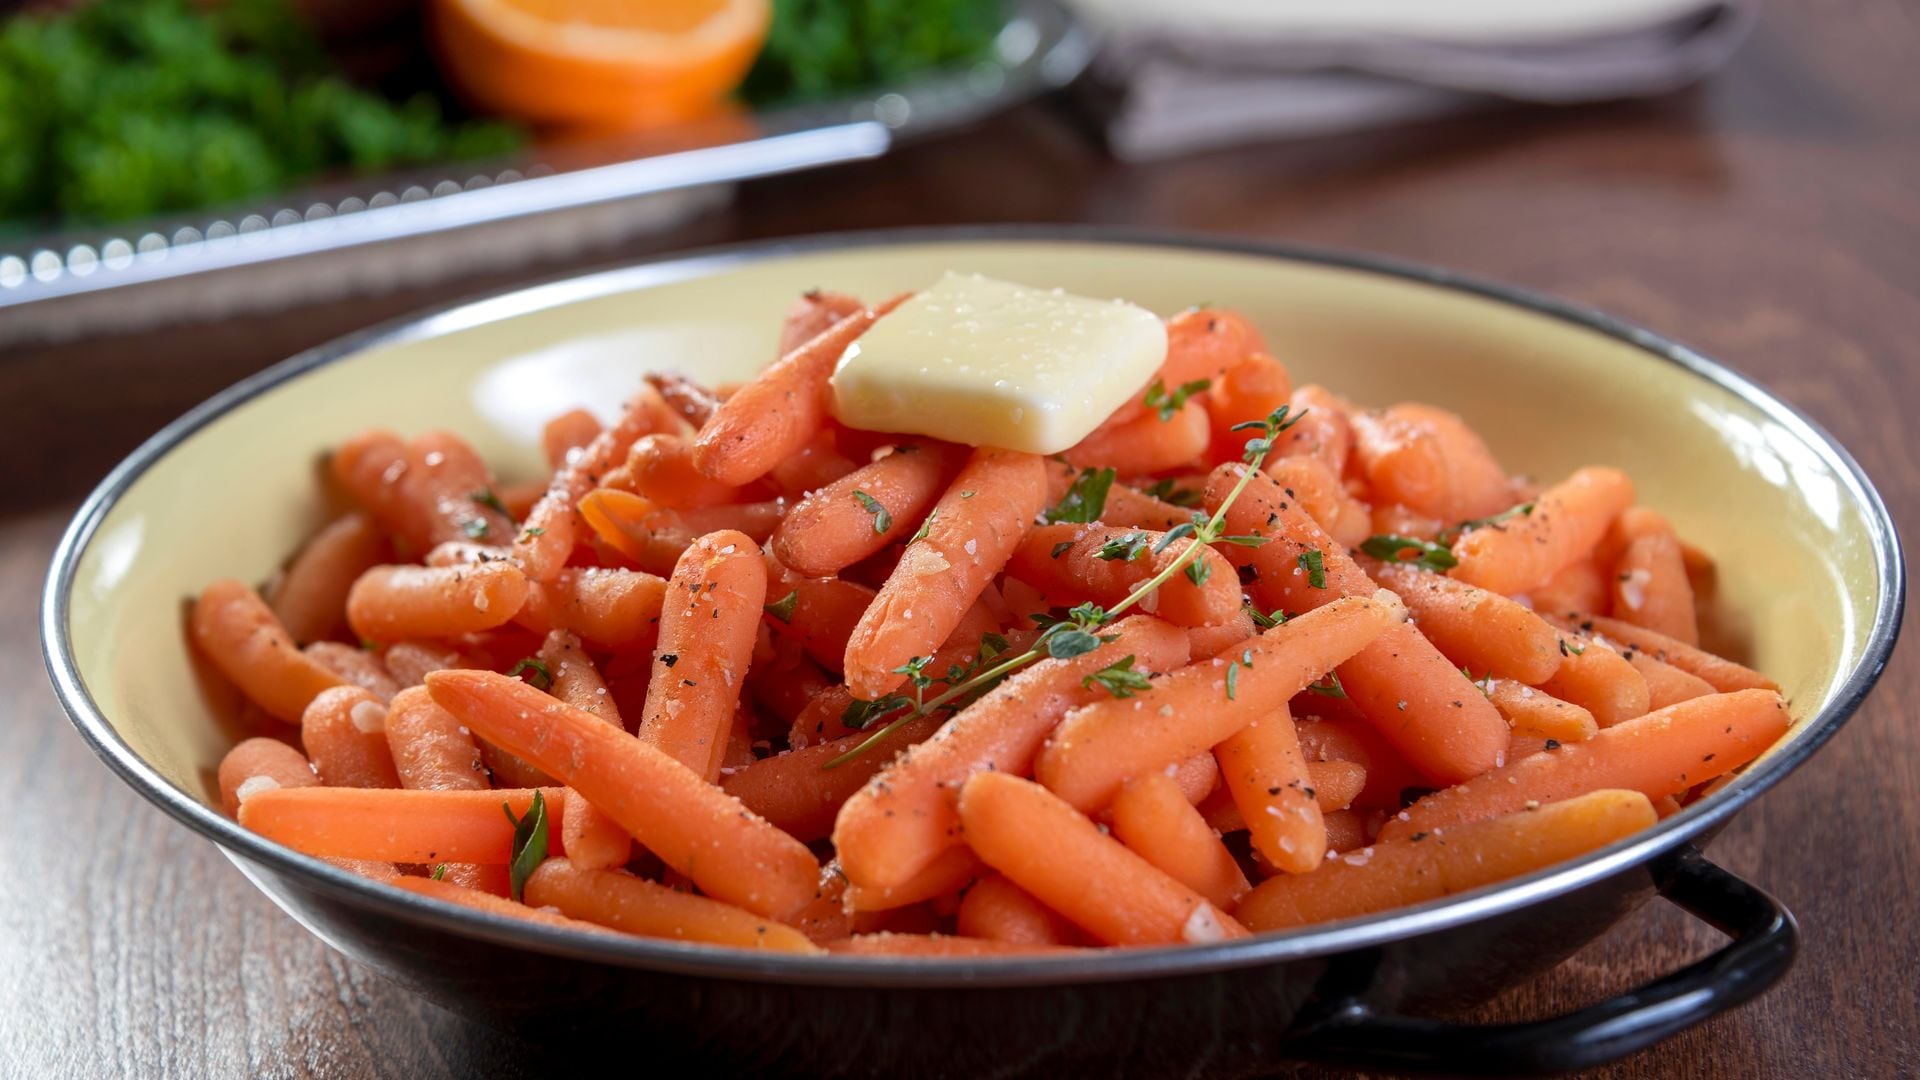 Baby carrots can significantly make you look and feel healthier